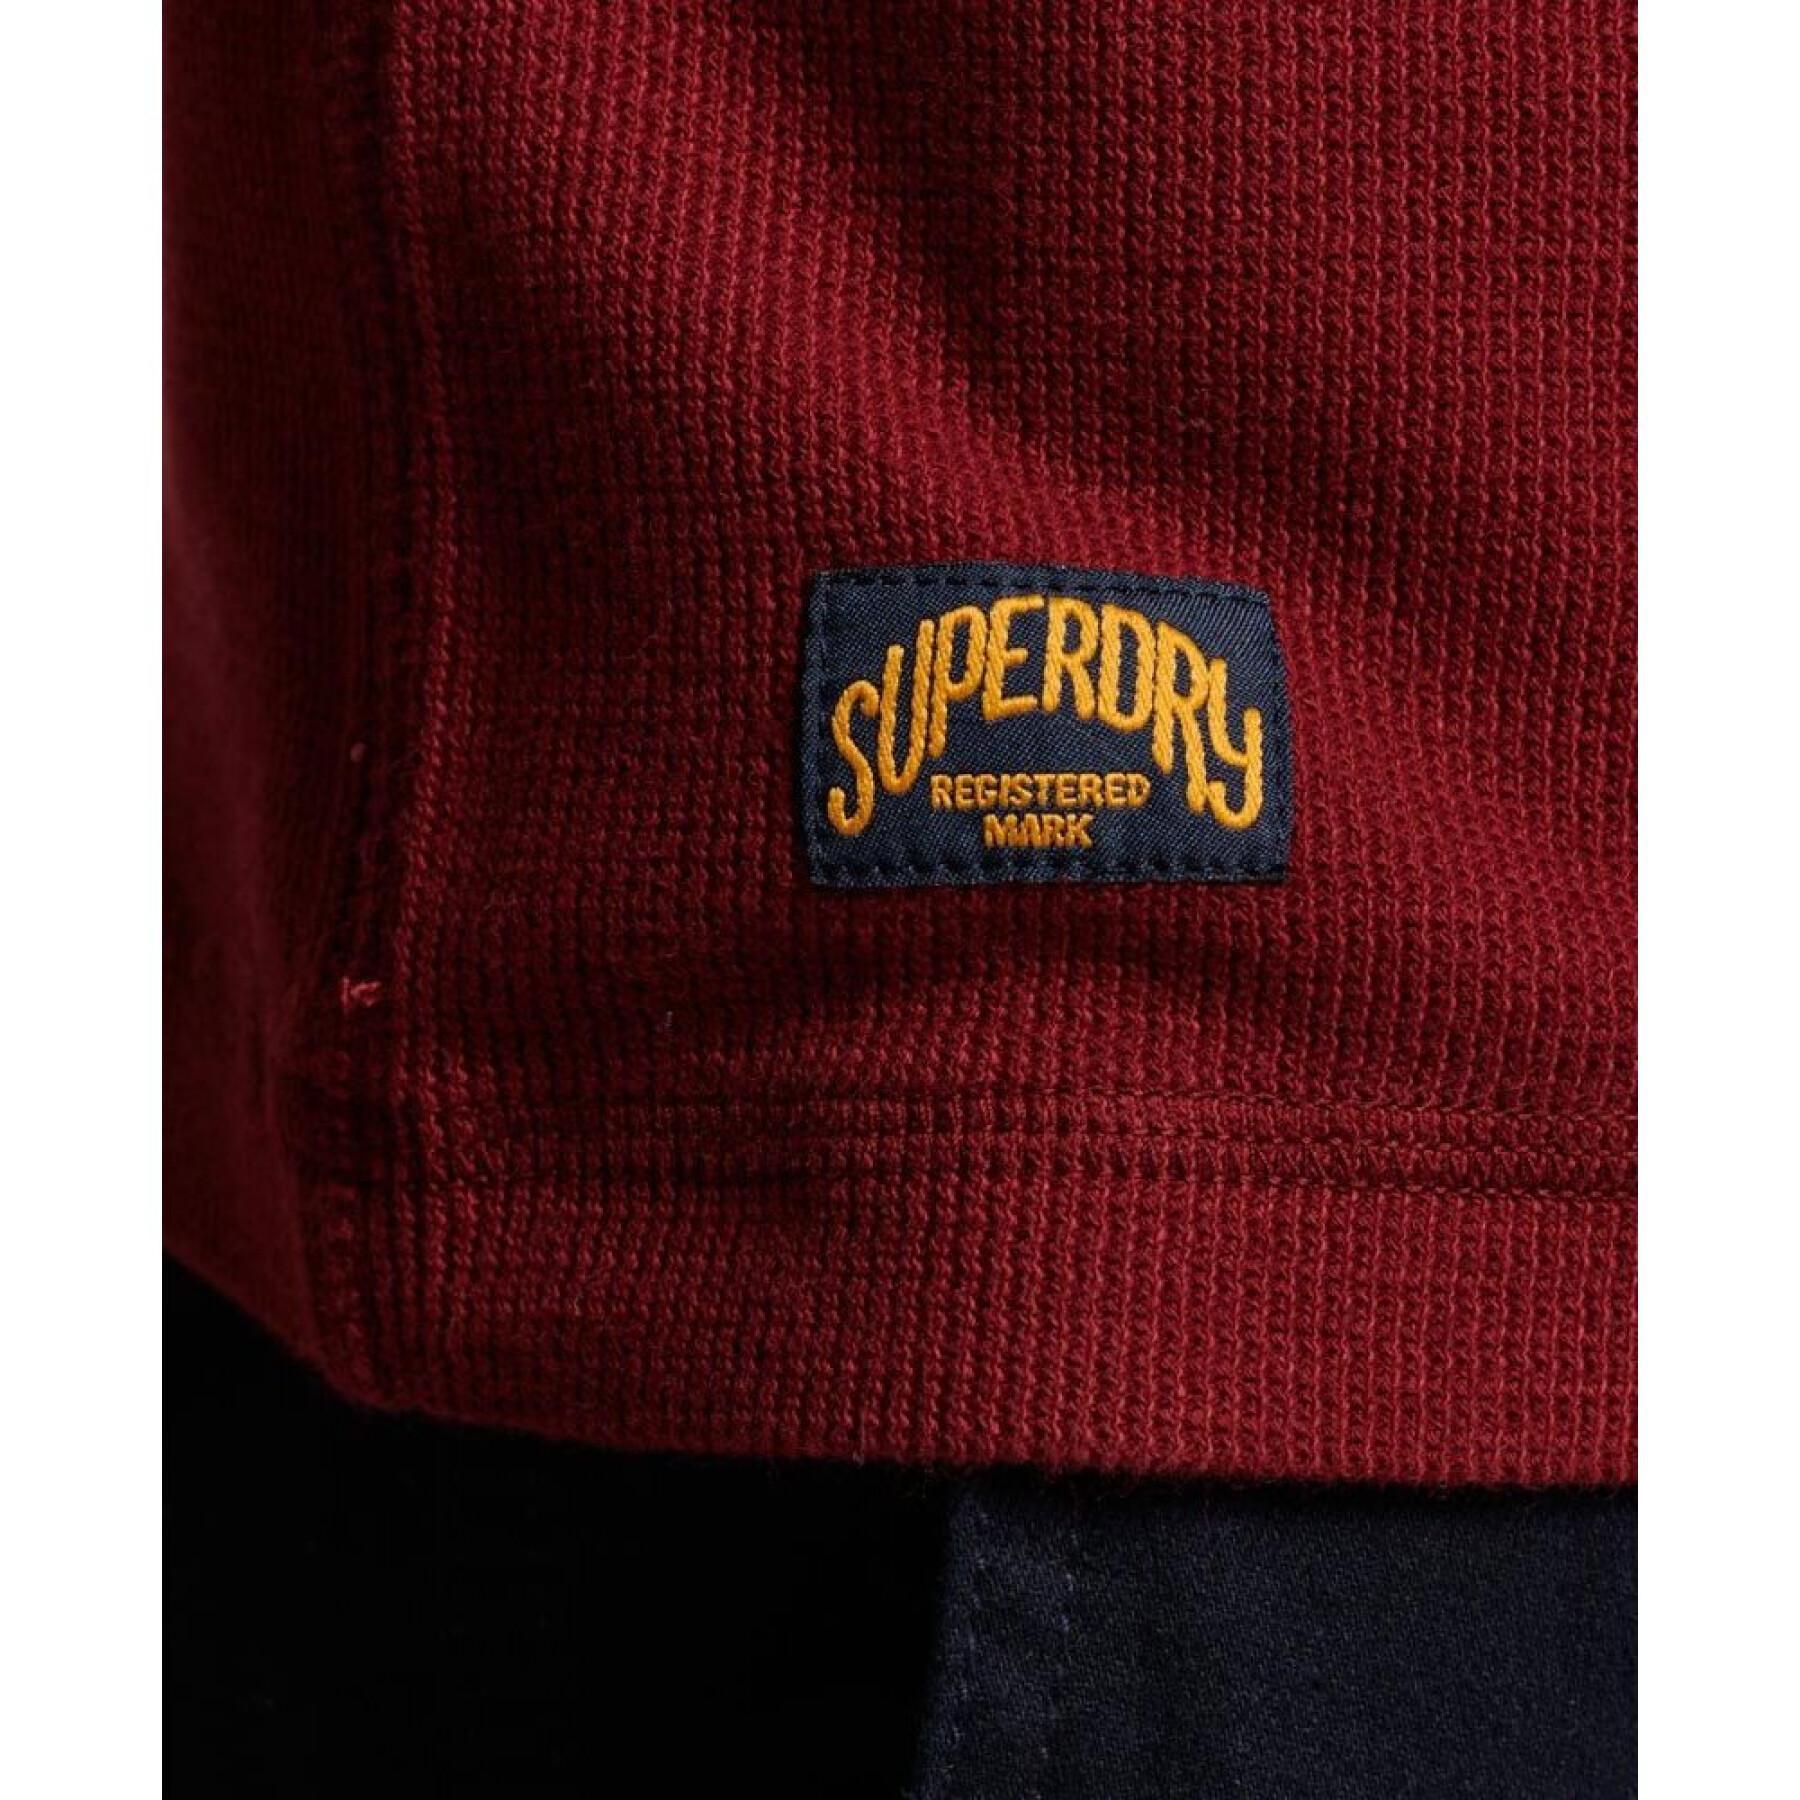 Long-sleeved embossed T-shirt with Tunisian collar Superdry